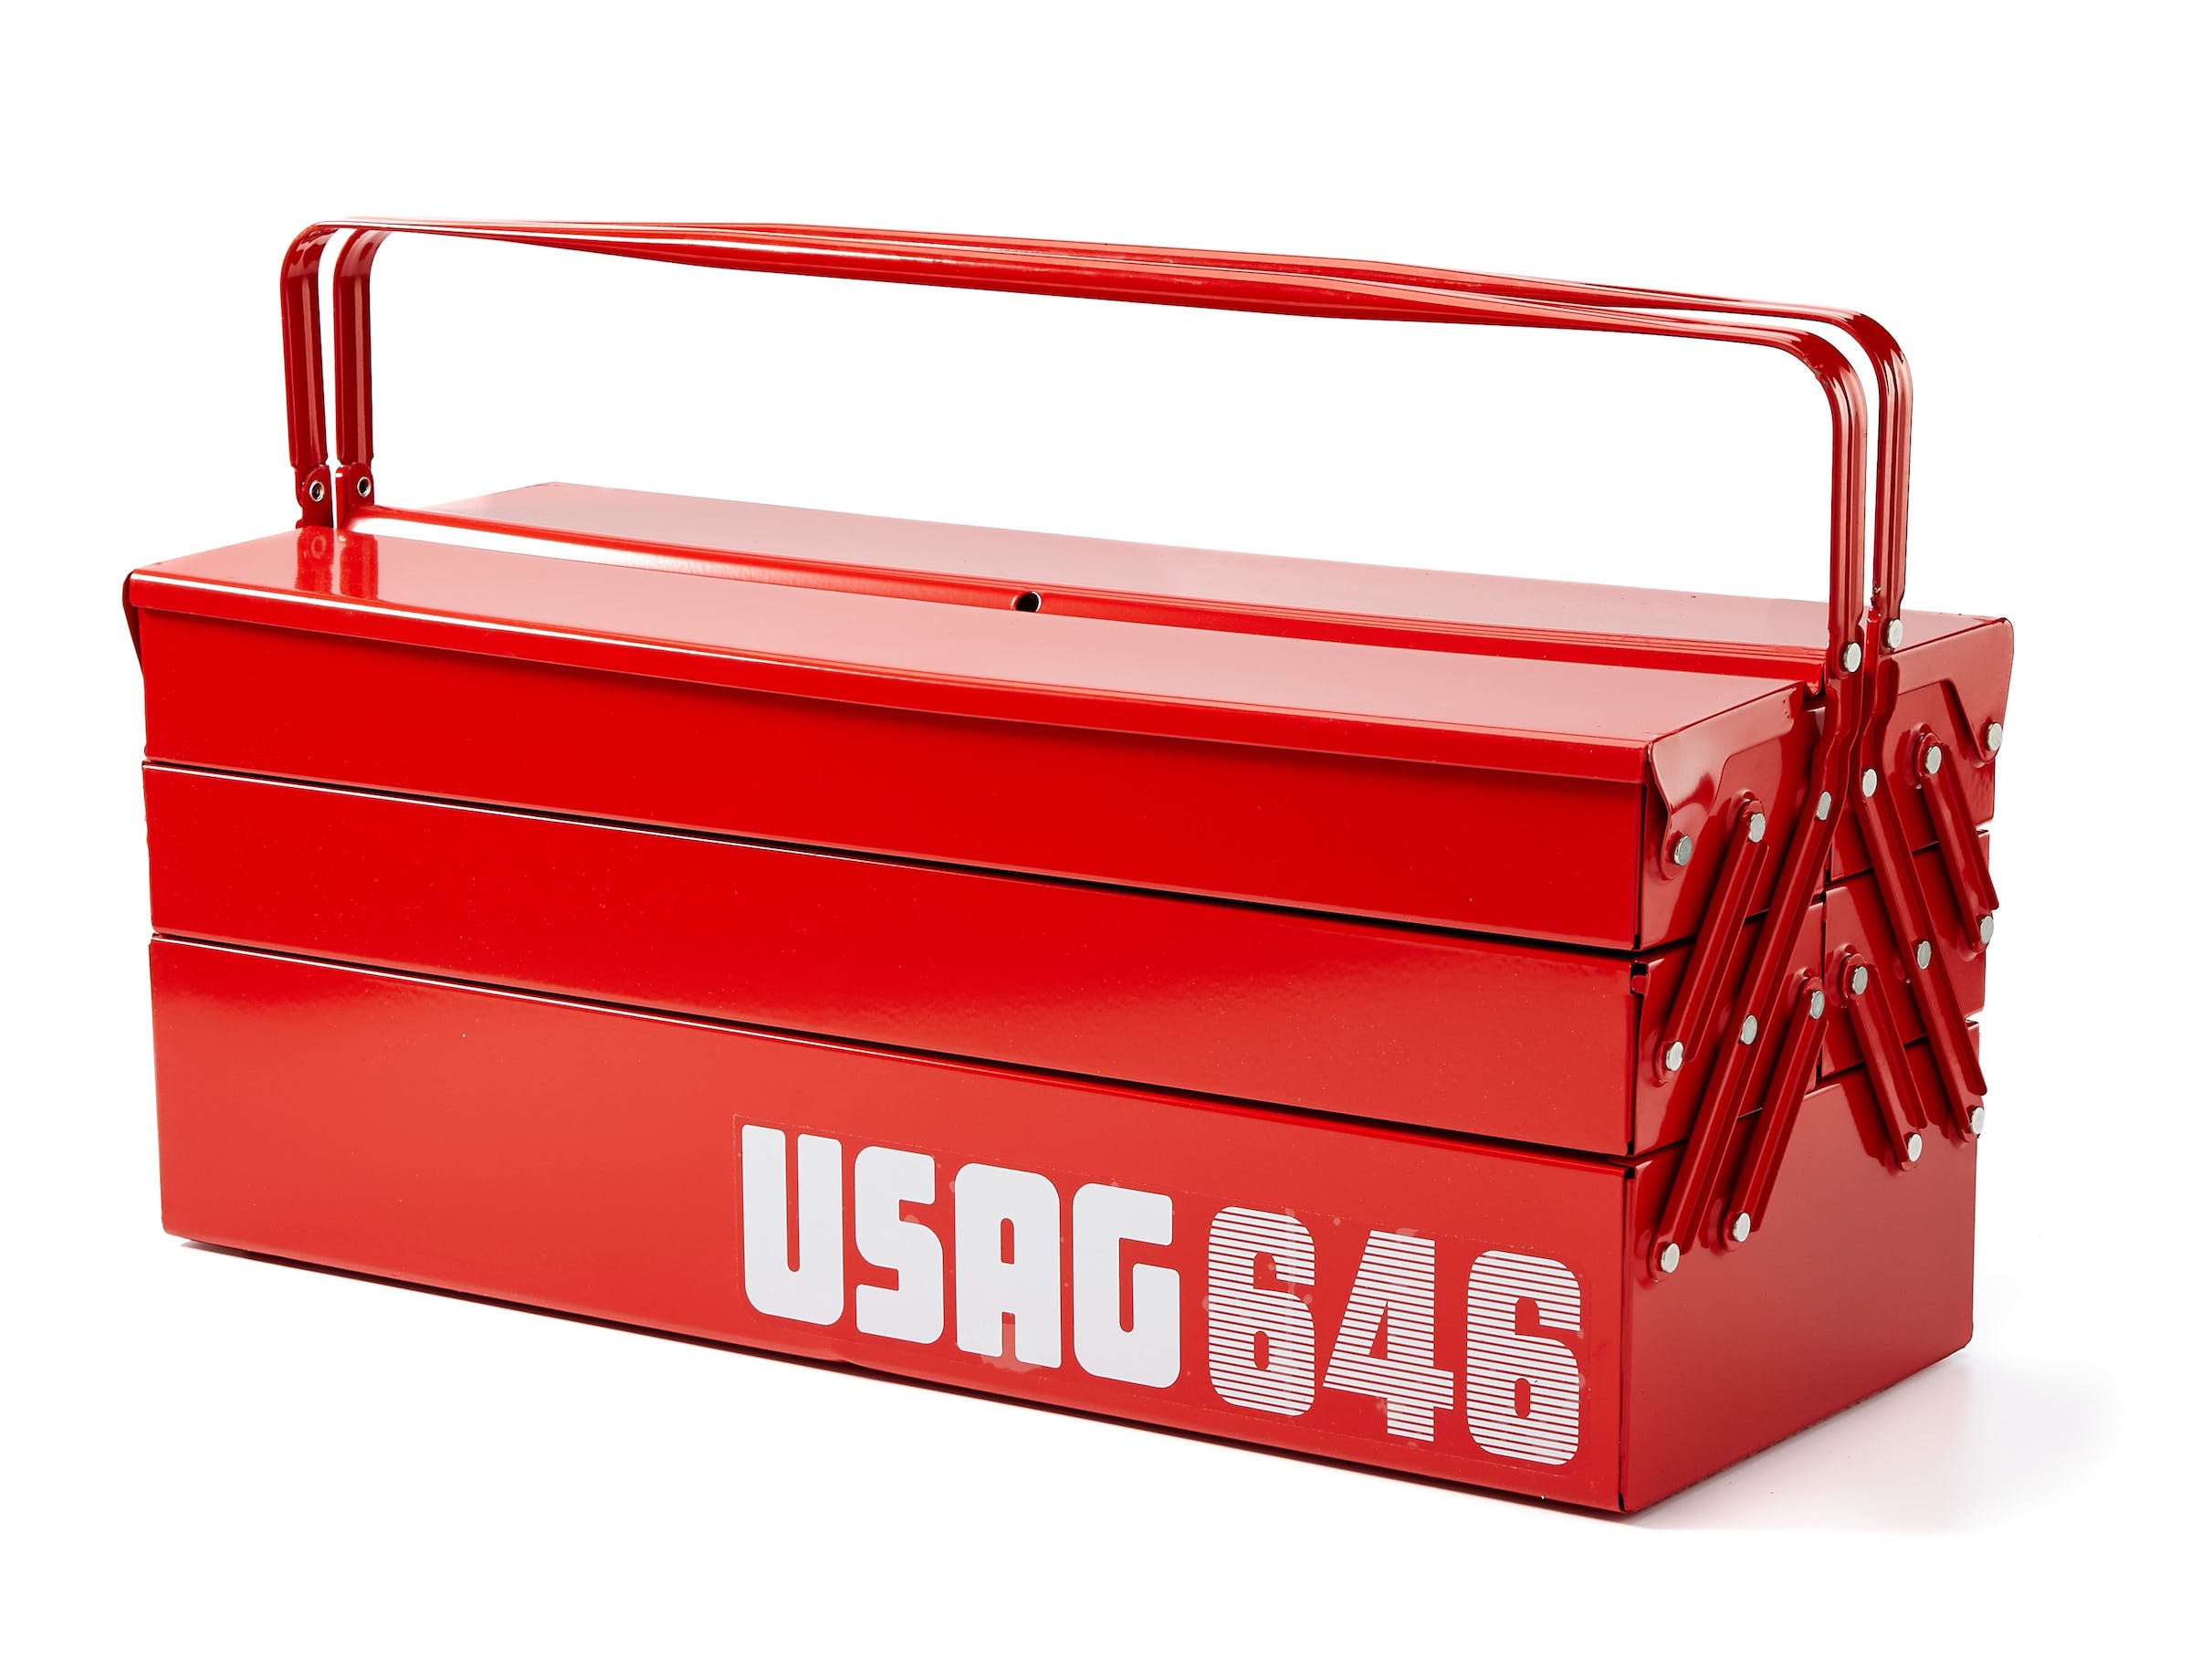 The USAG 646 Toolbox - A Buy-It-For-Life Italian Toolbox For $66 USD